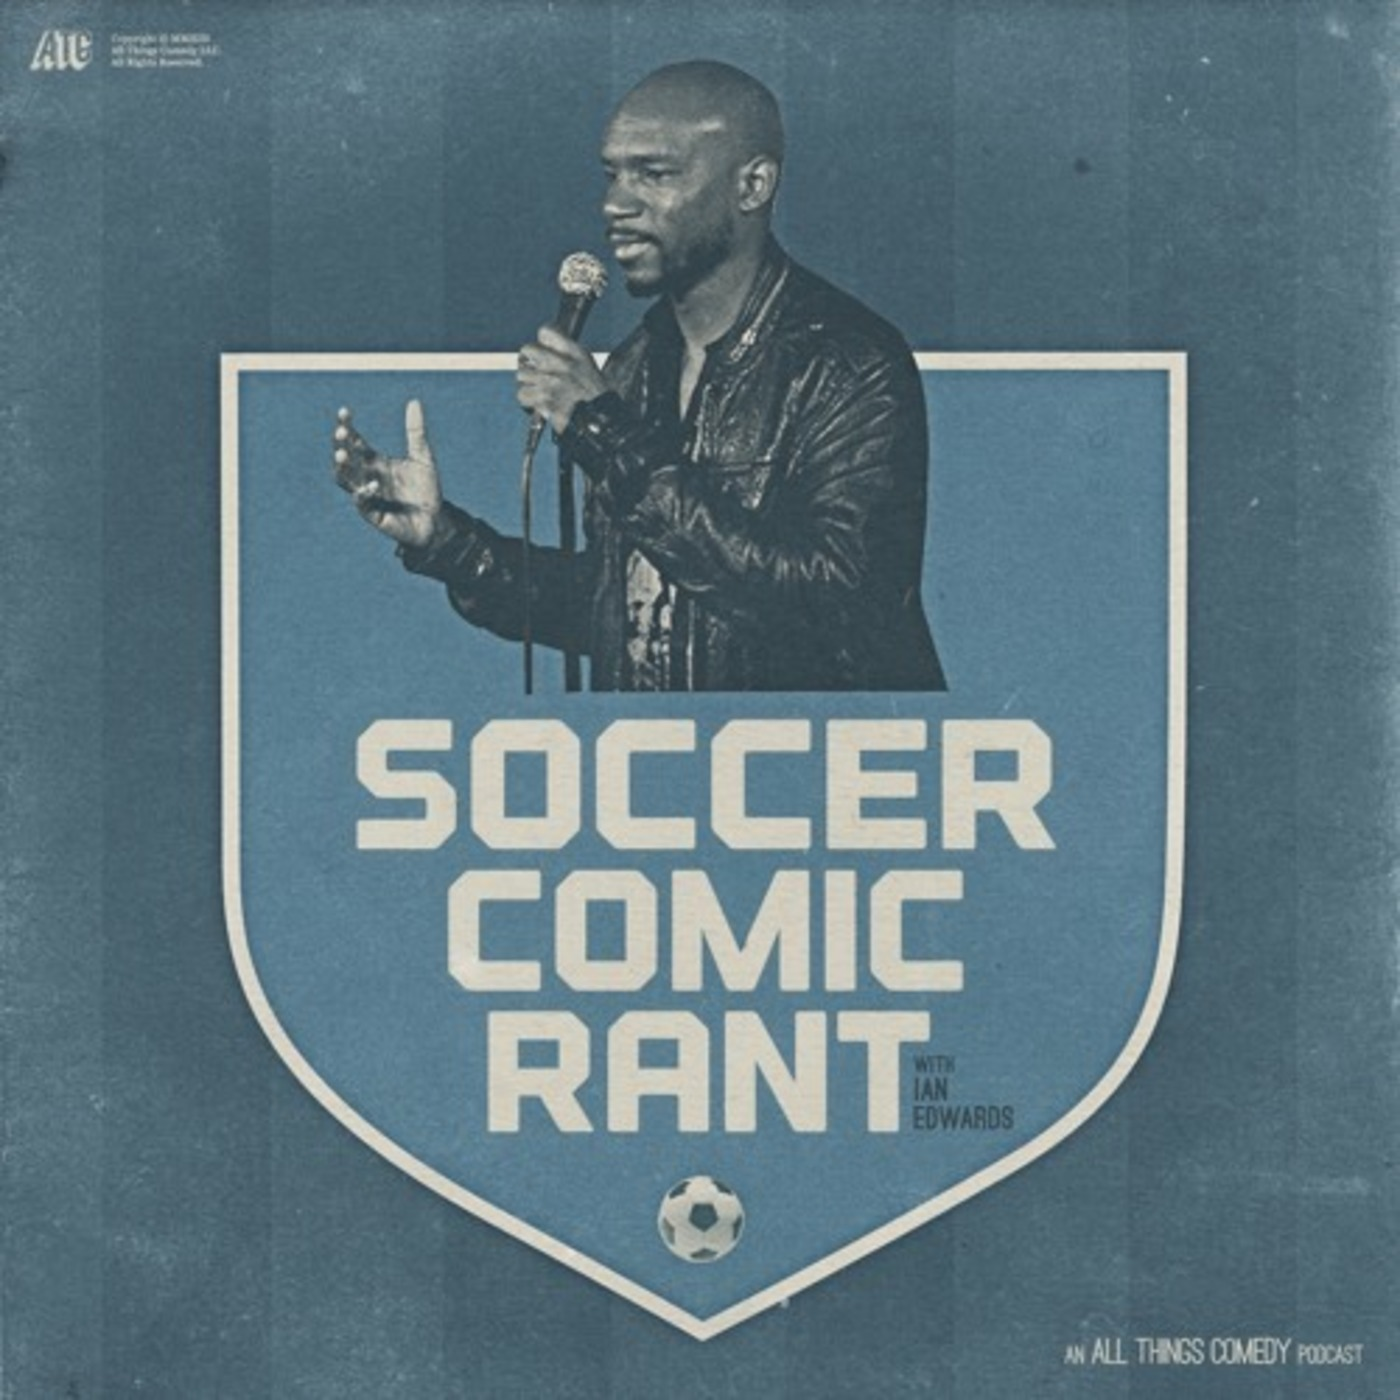 Soccer Comic Rant #59 and a 1/2